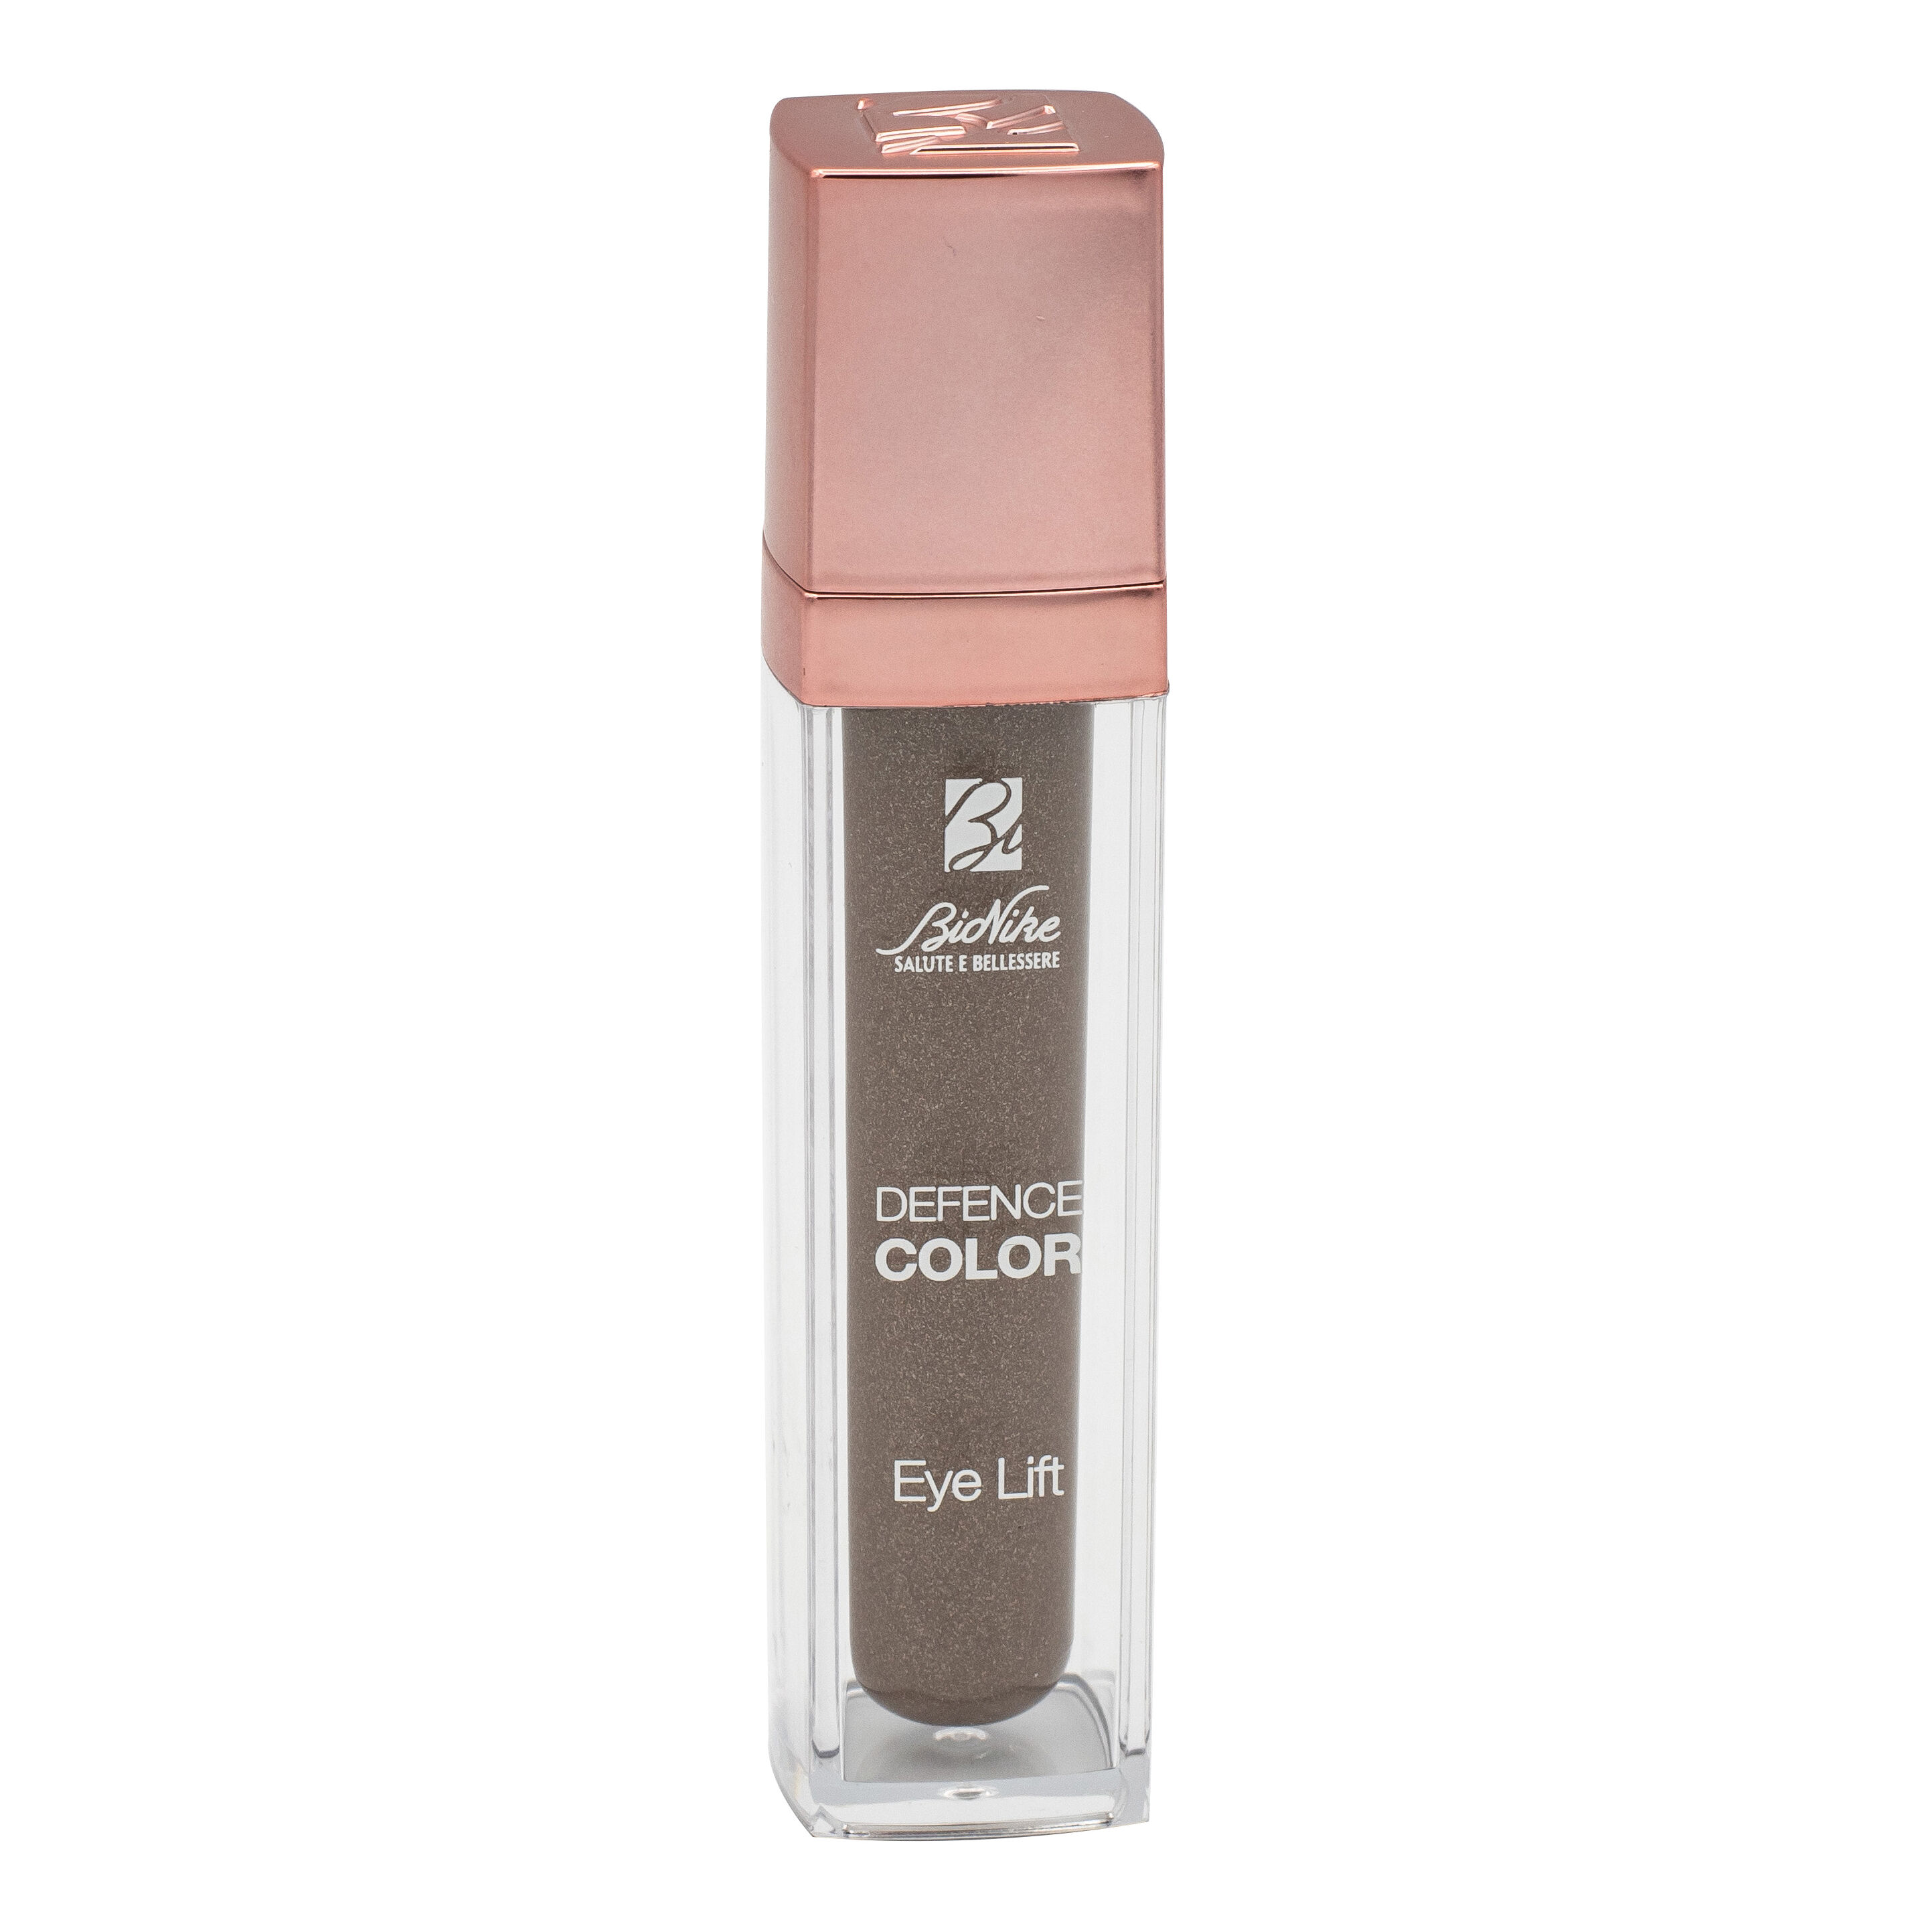 bionike defence color eyelift ombretto liquido 605 coffee